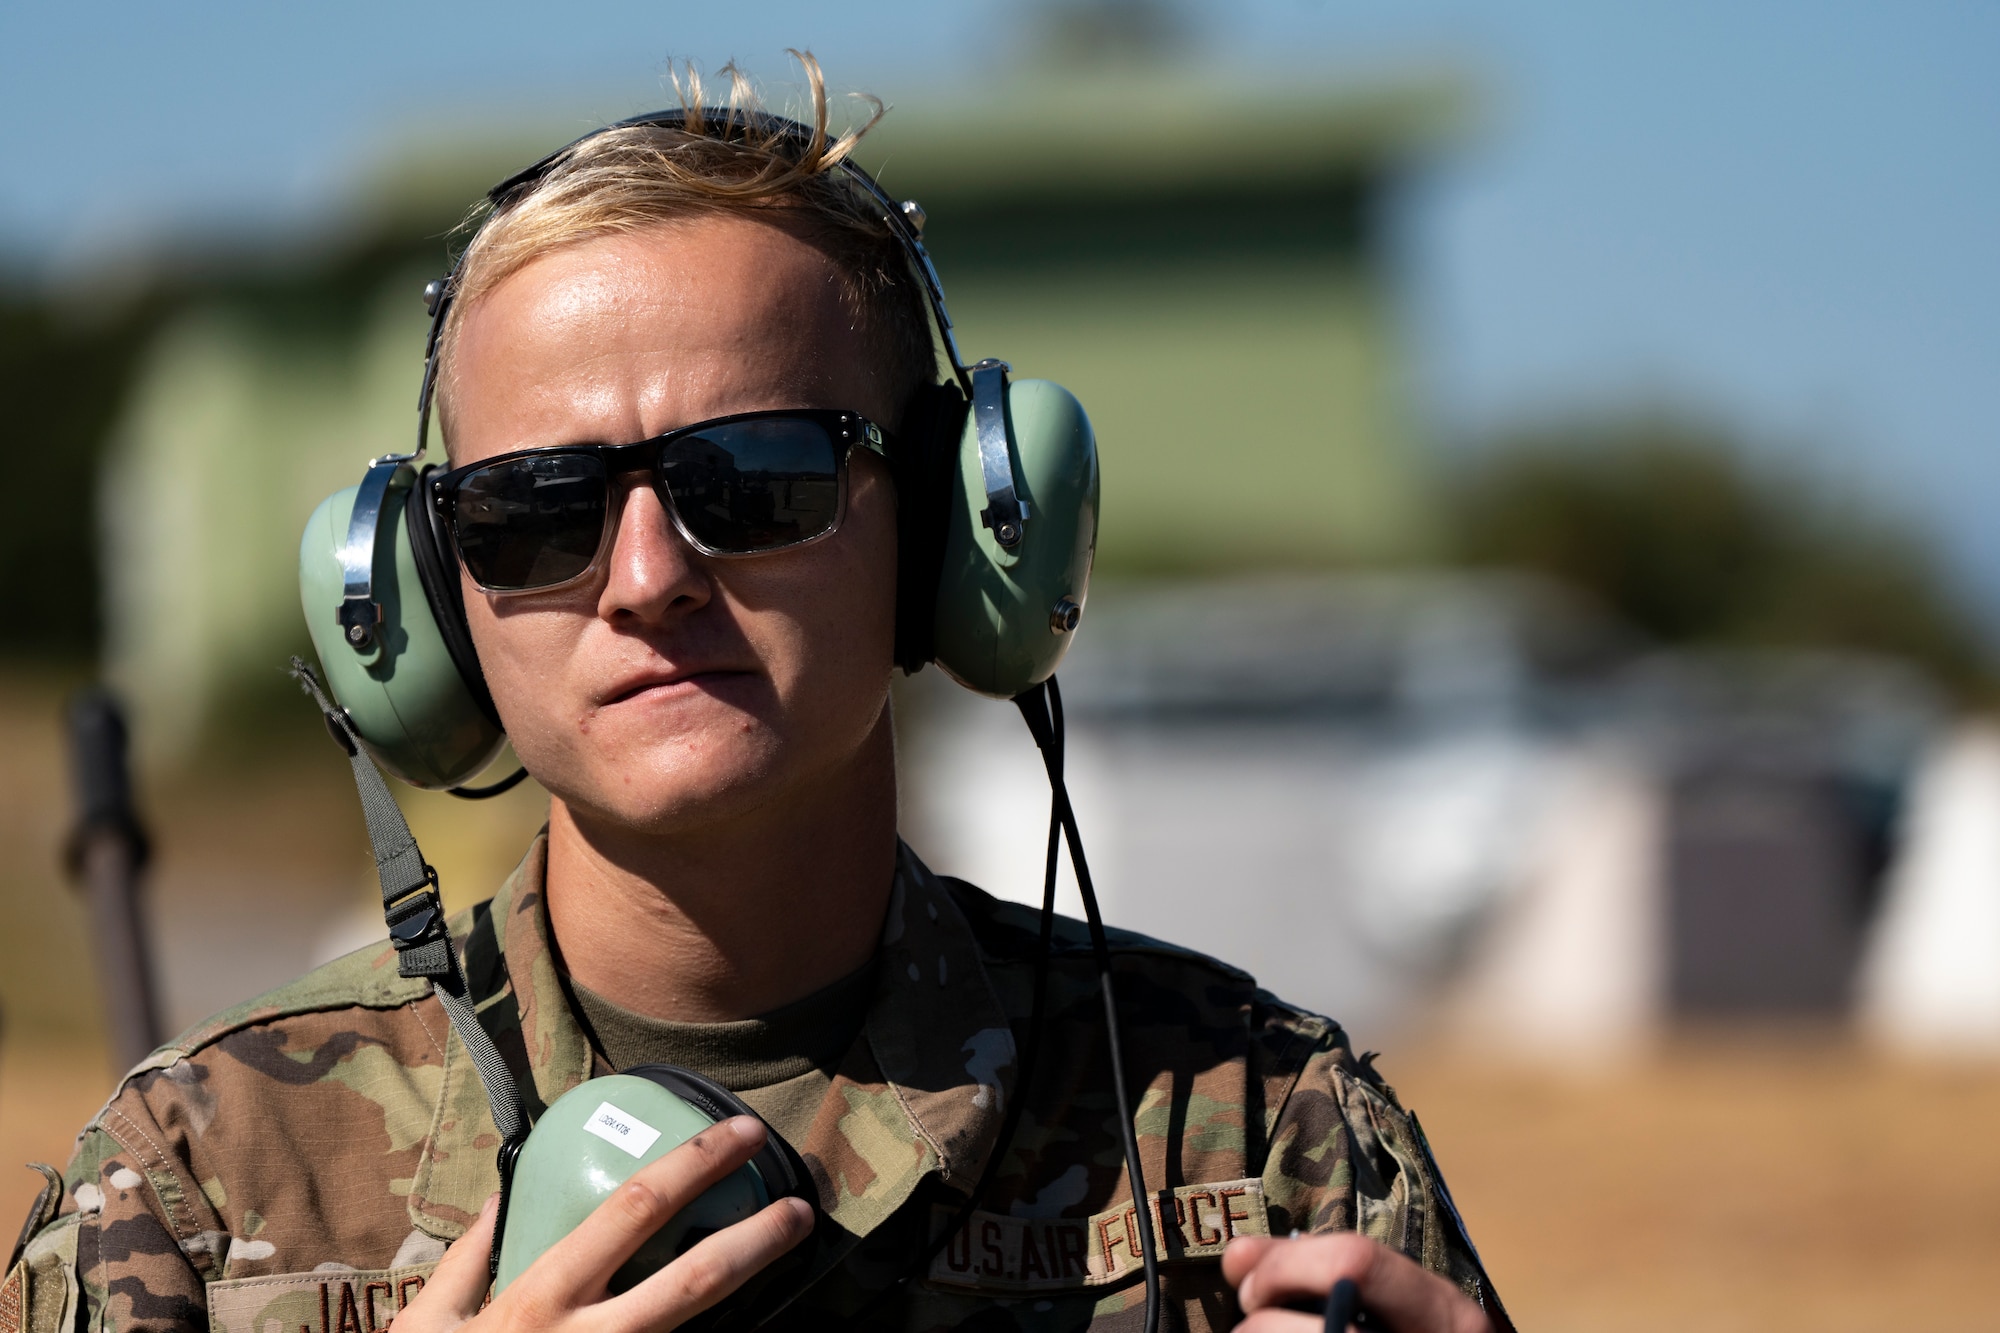 Photo of an Airman wearing a protective headset and sunglasses